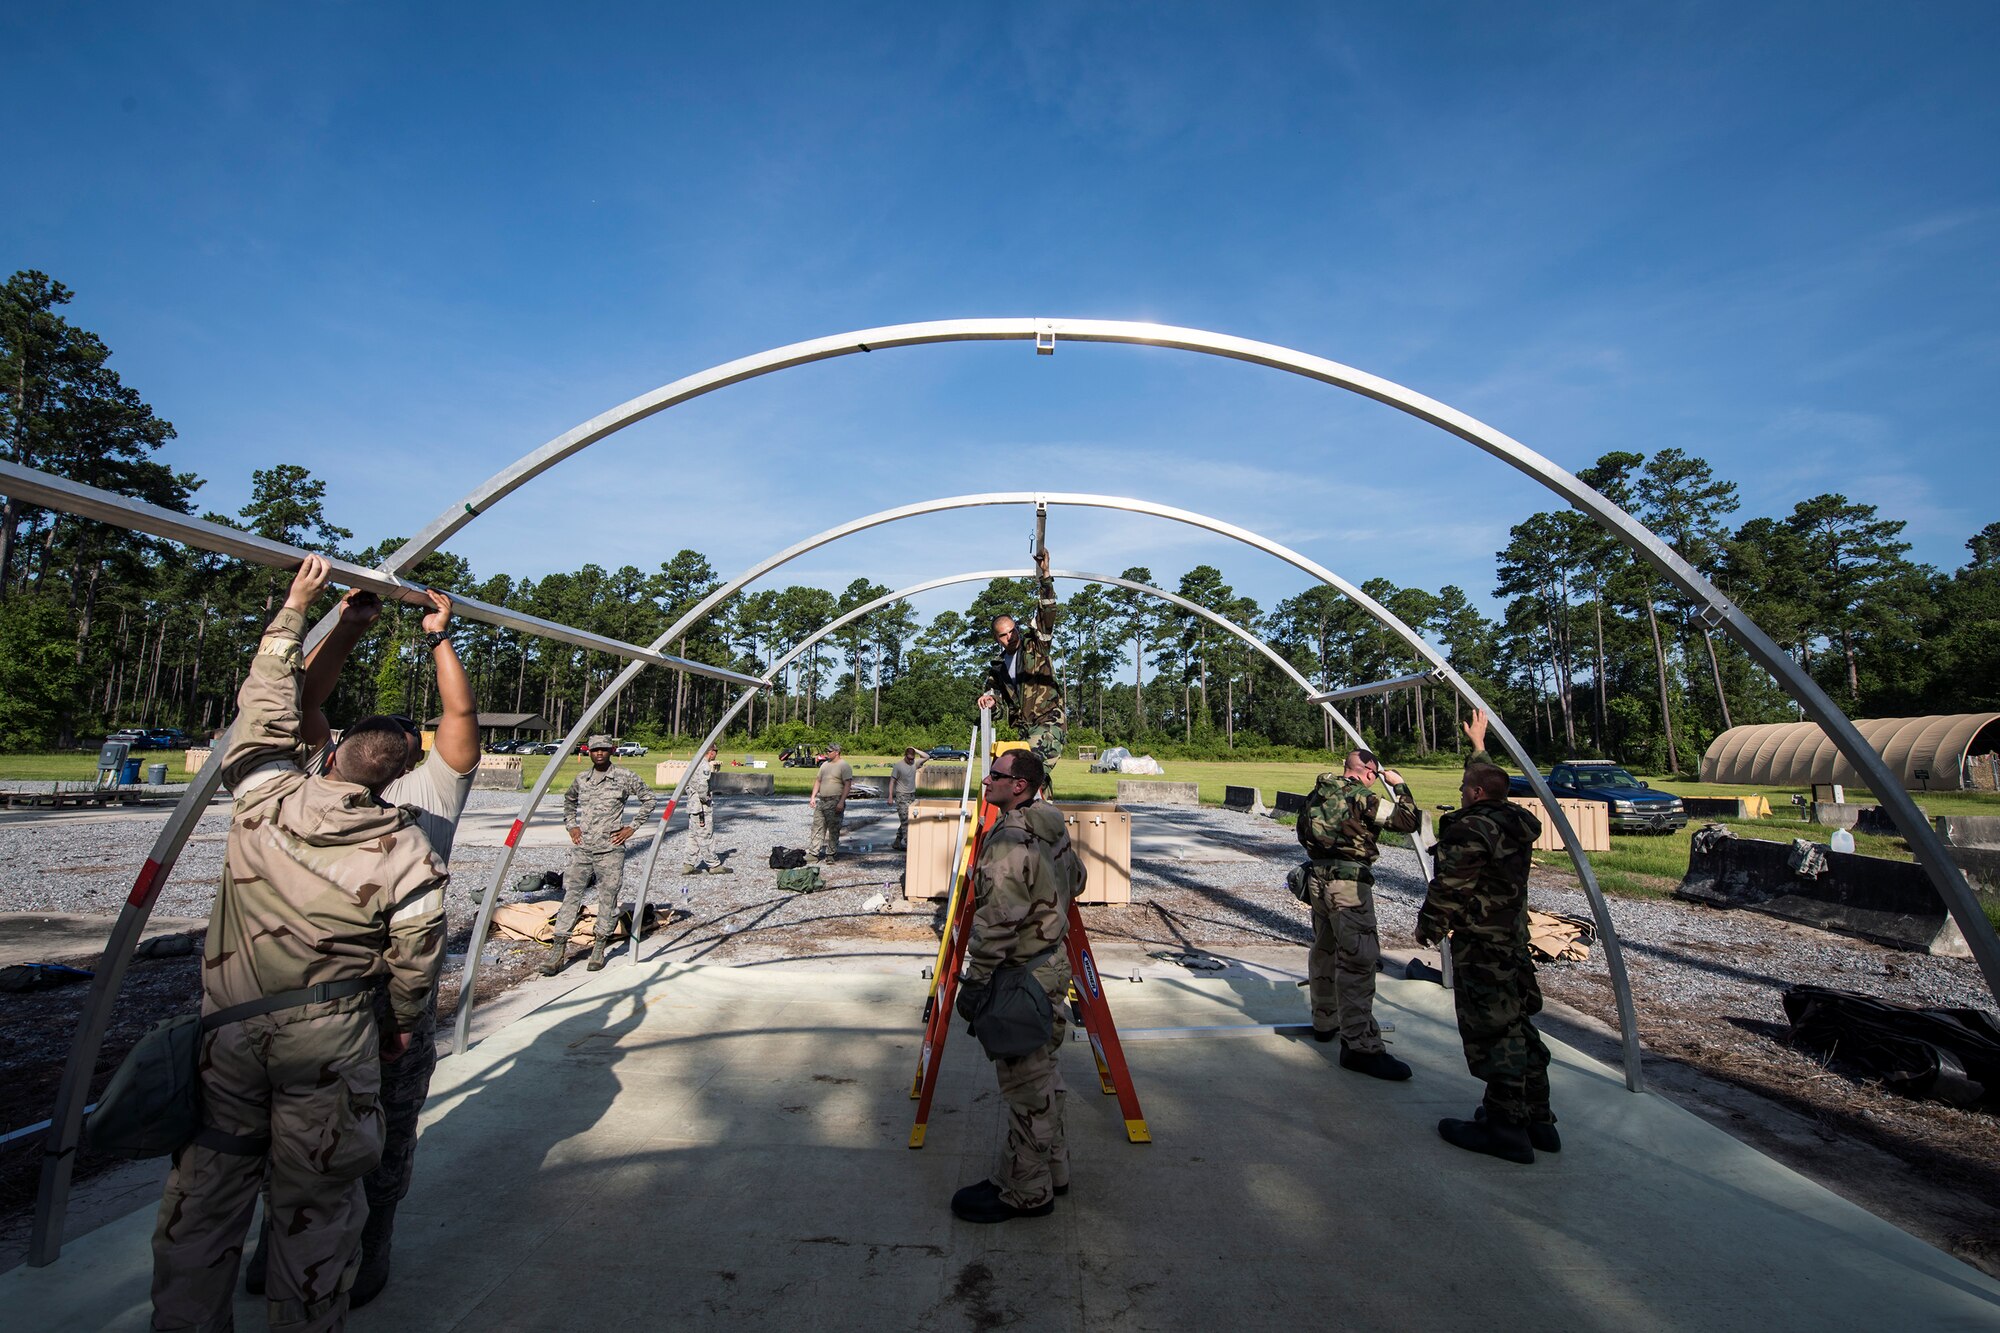 Airmen from the 23d Civil Engineer Squadron, build an Alaskan Small Shelter System during a Chemical, Biological, Radiological, Nuclear and Explosive (CBRNE) Olympics, June 21, 2018, at Moody Air Force Base, Ga. Moody held its first CBRNE Olympics to further Airmen’s overall knowledge on all of the aspects of CBRNE through a new method that was meant to establish a sense of competition and camaraderie. (U.S. Air Force photo by Airman 1st Class Eugene Oliver)